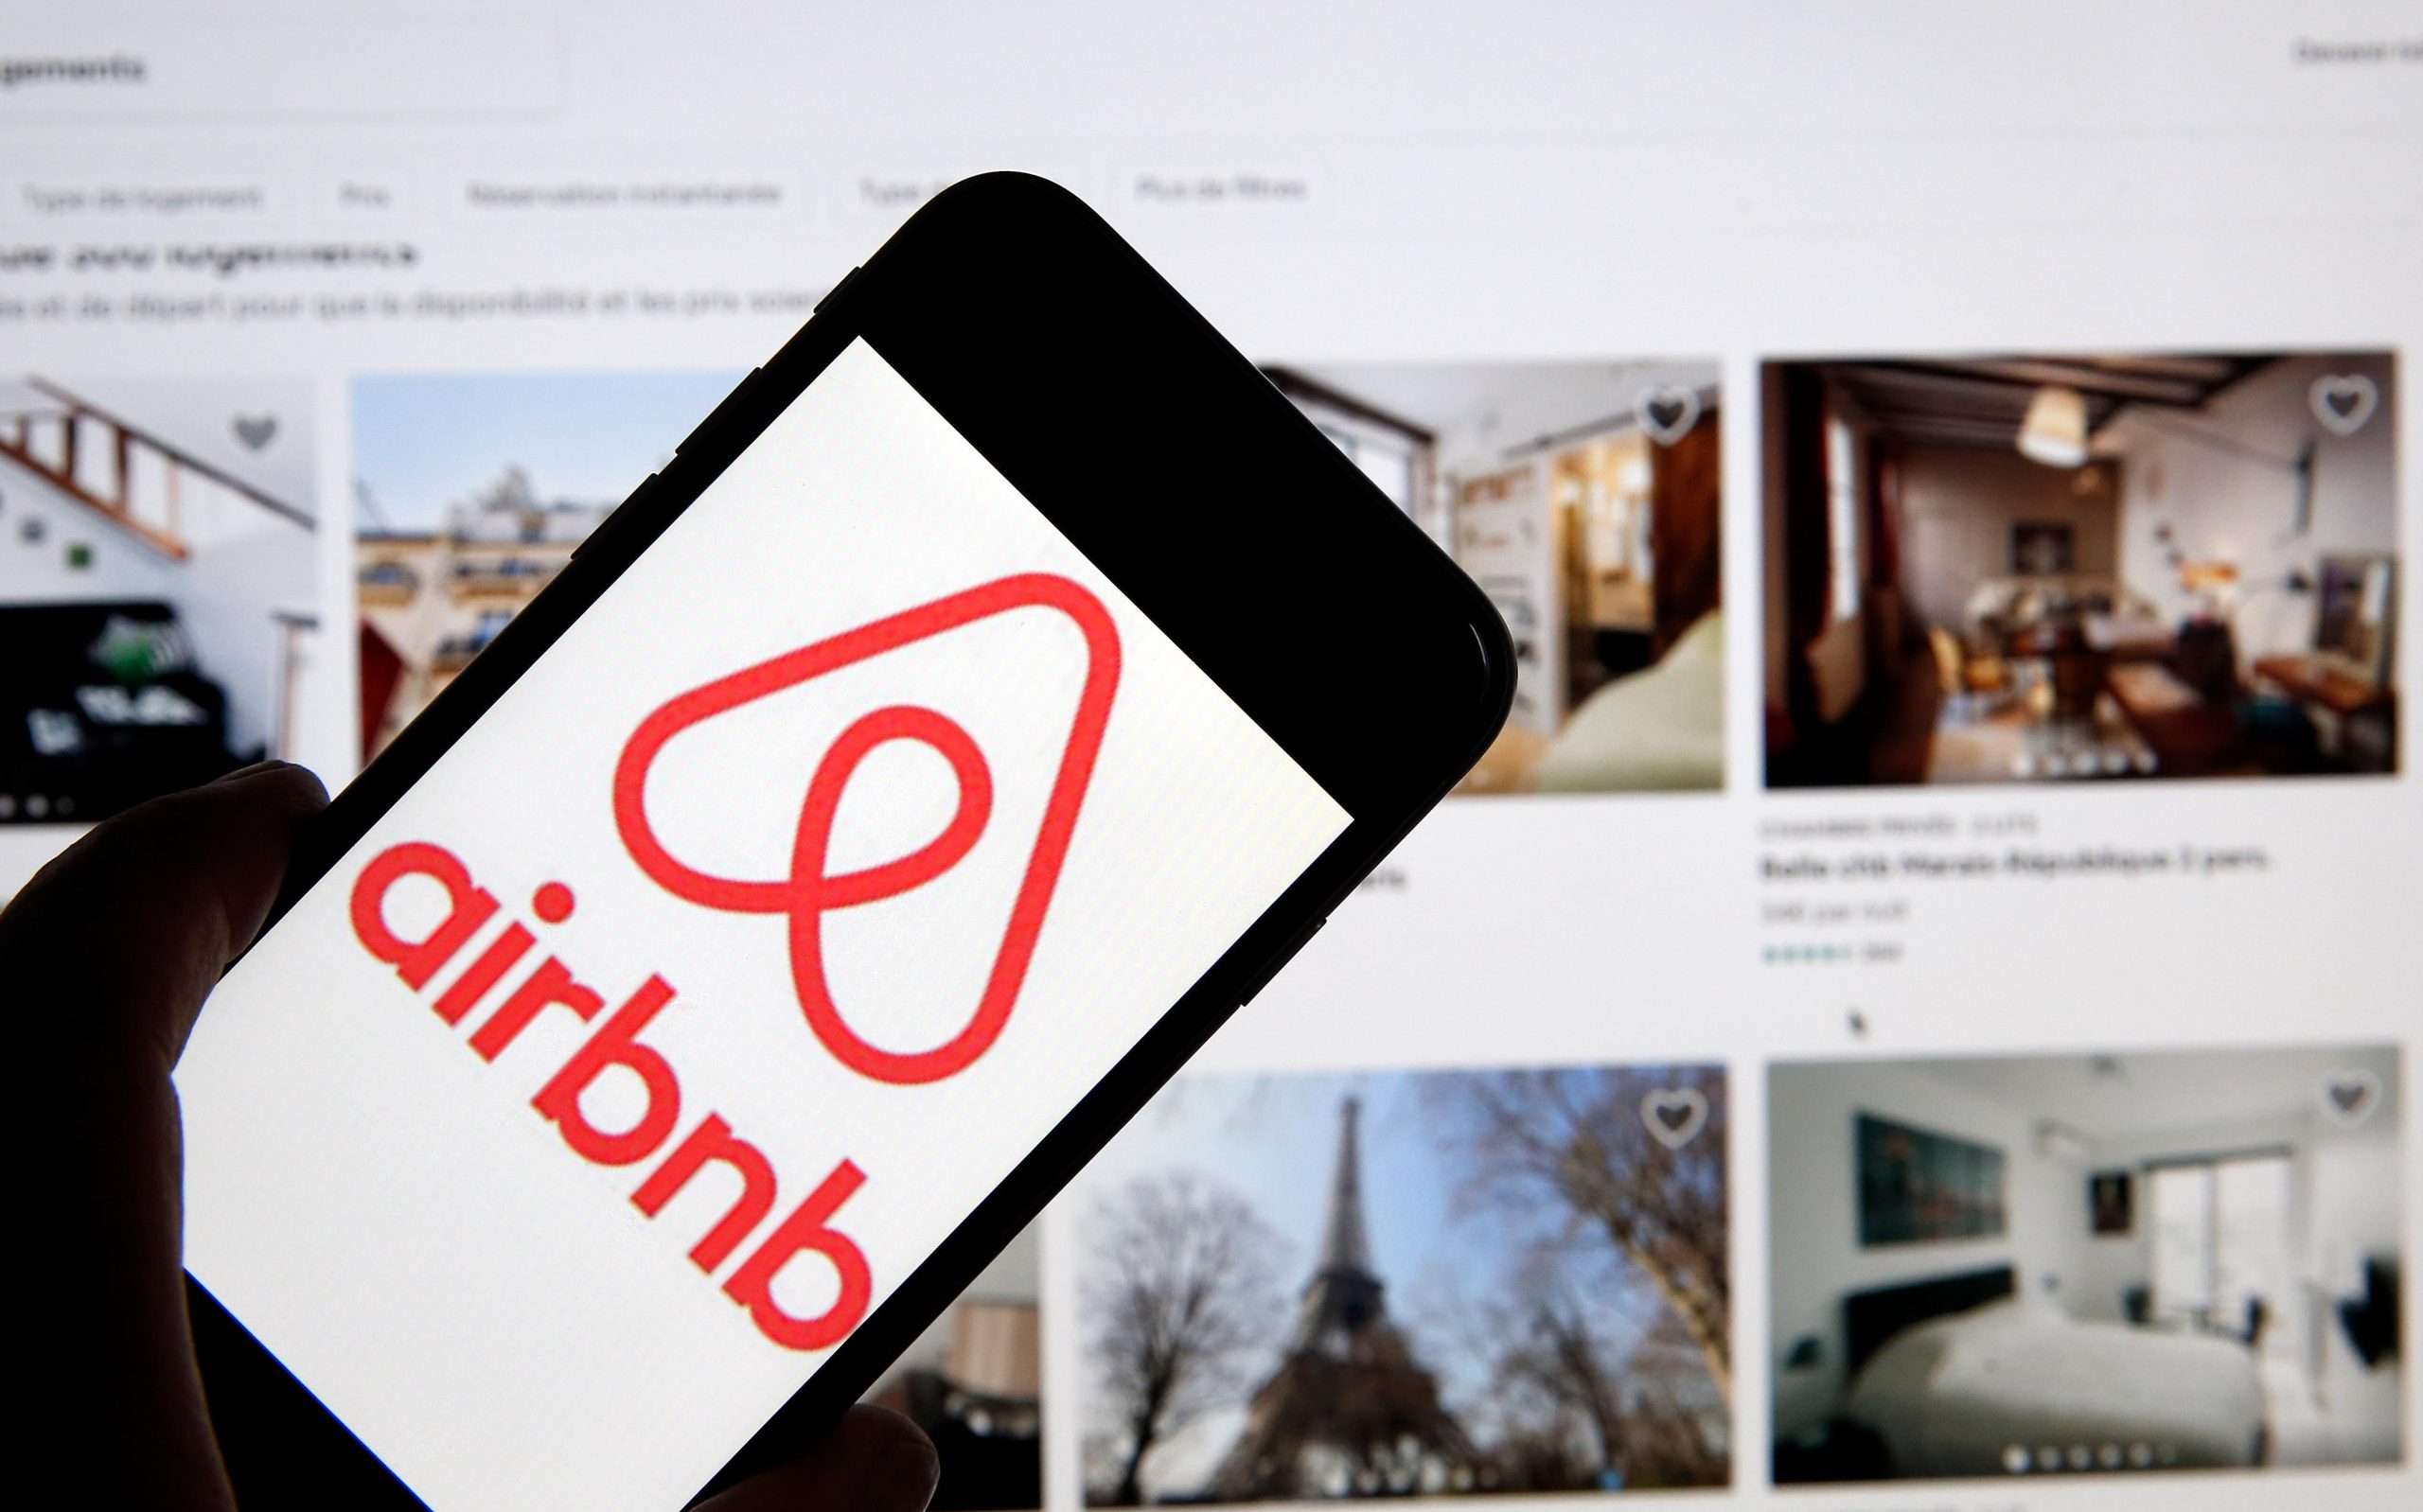 The Airbnb IPO Date and Price